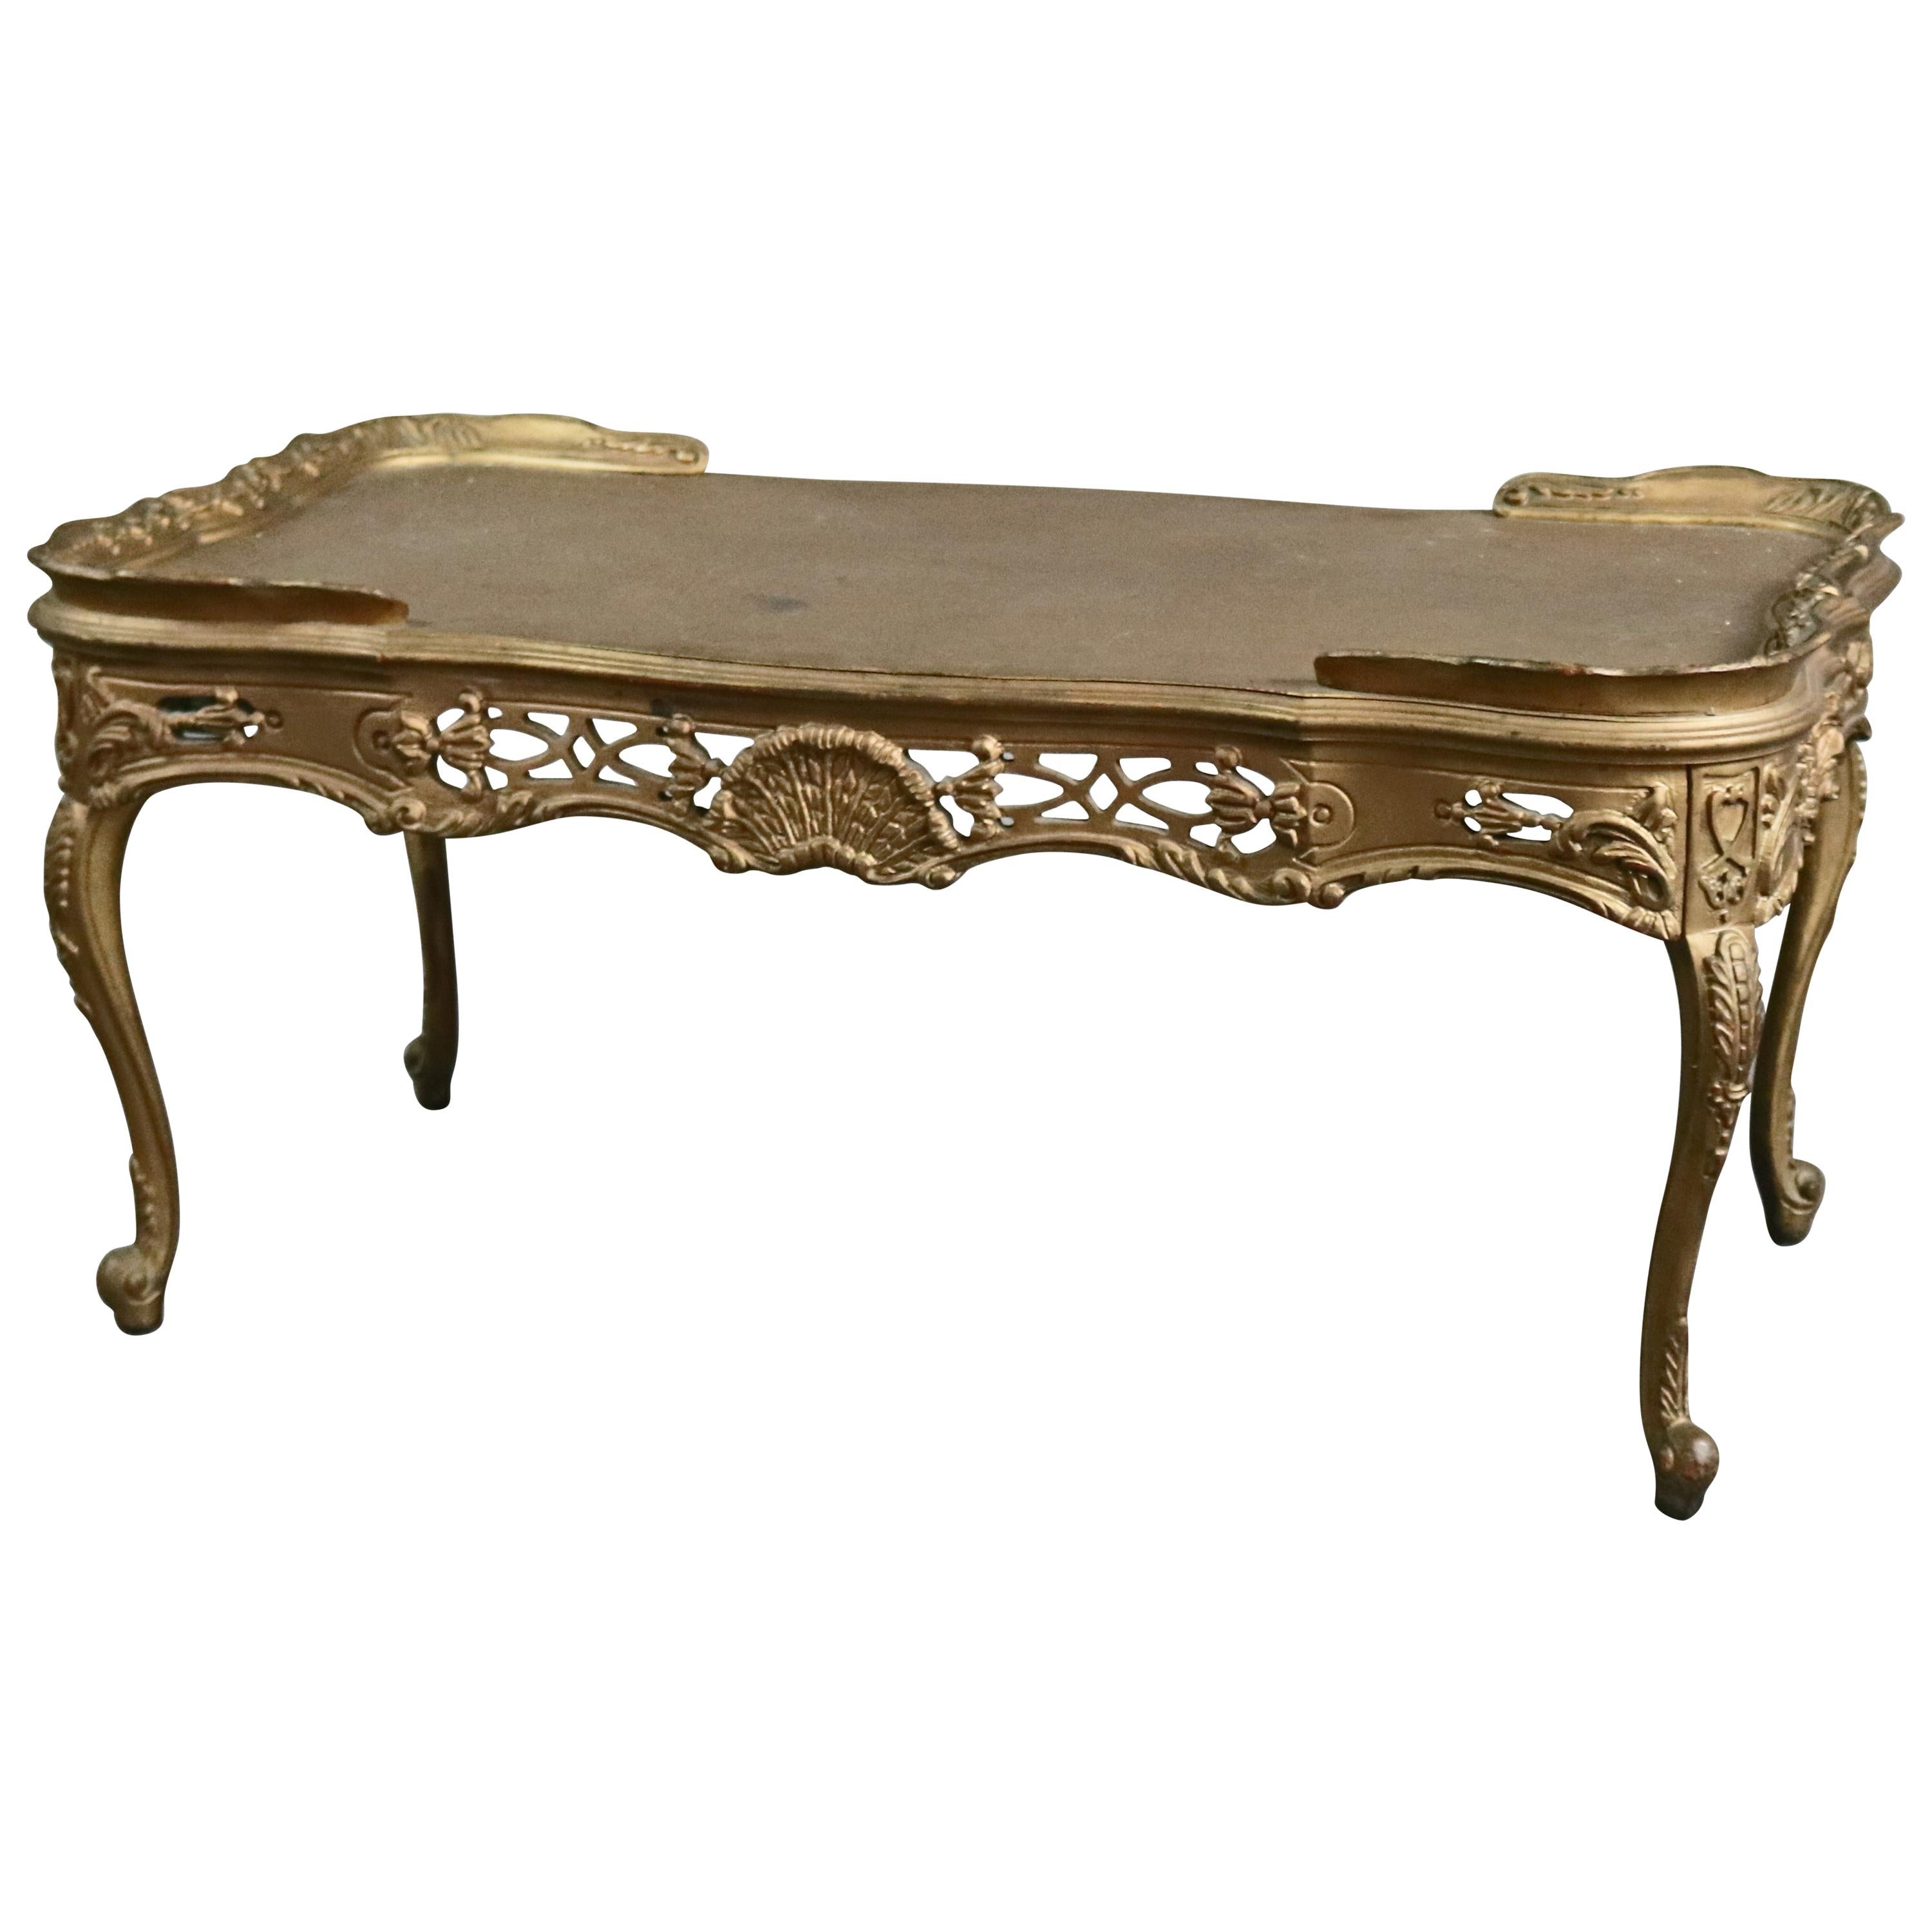 Antique French Louis XIV Giltwood Tea Table, 20th Century